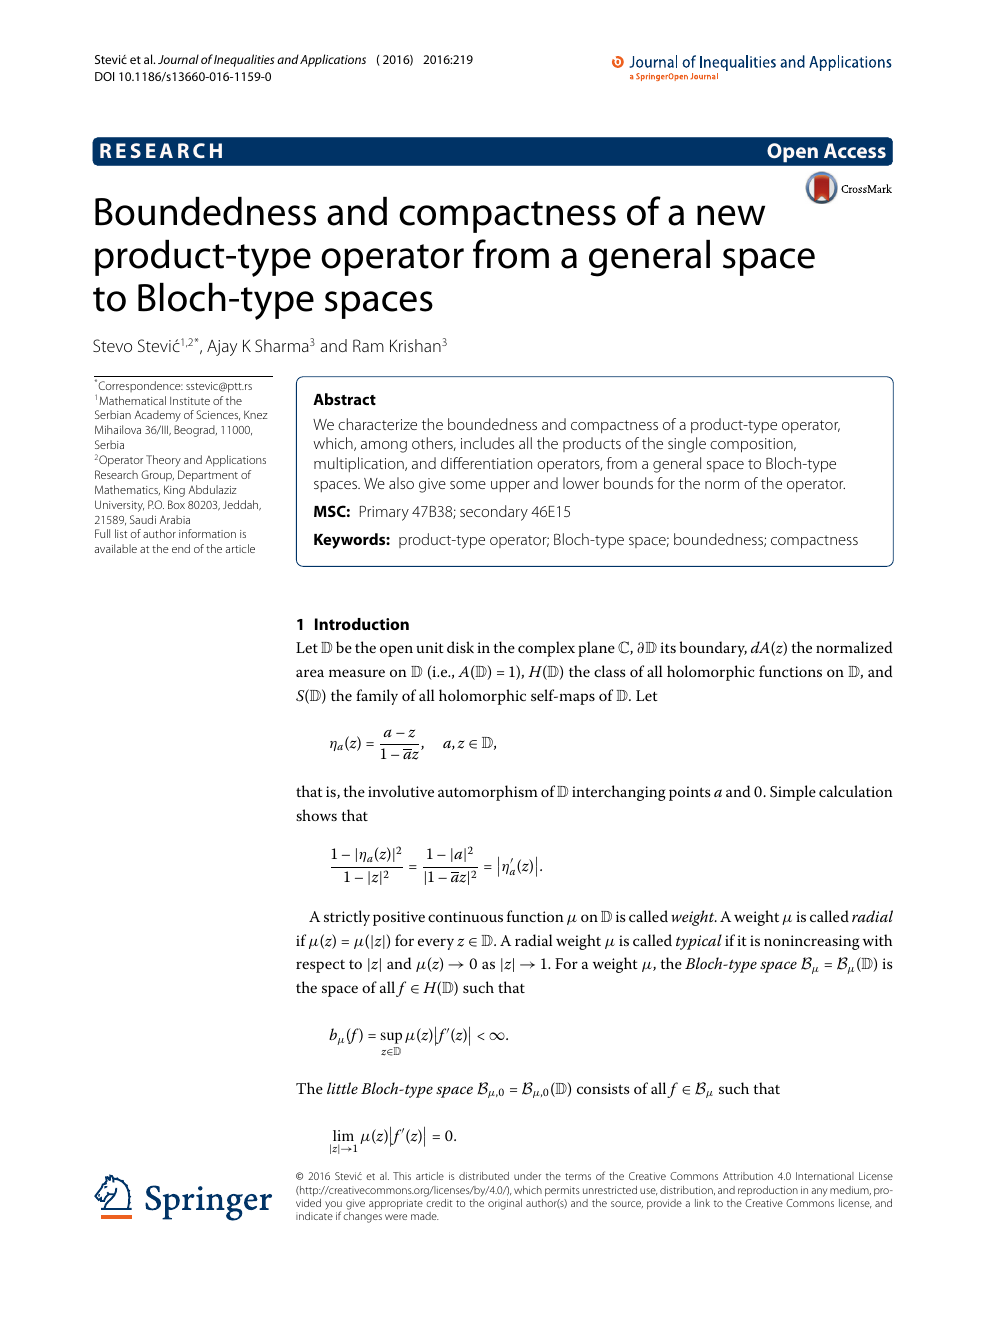 Boundedness And Compactness Of A New Product Type Operator From A General Space To Bloch Type Spaces Topic Of Research Paper In Mathematics Download Scholarly Article Pdf And Read For Free On Cyberleninka